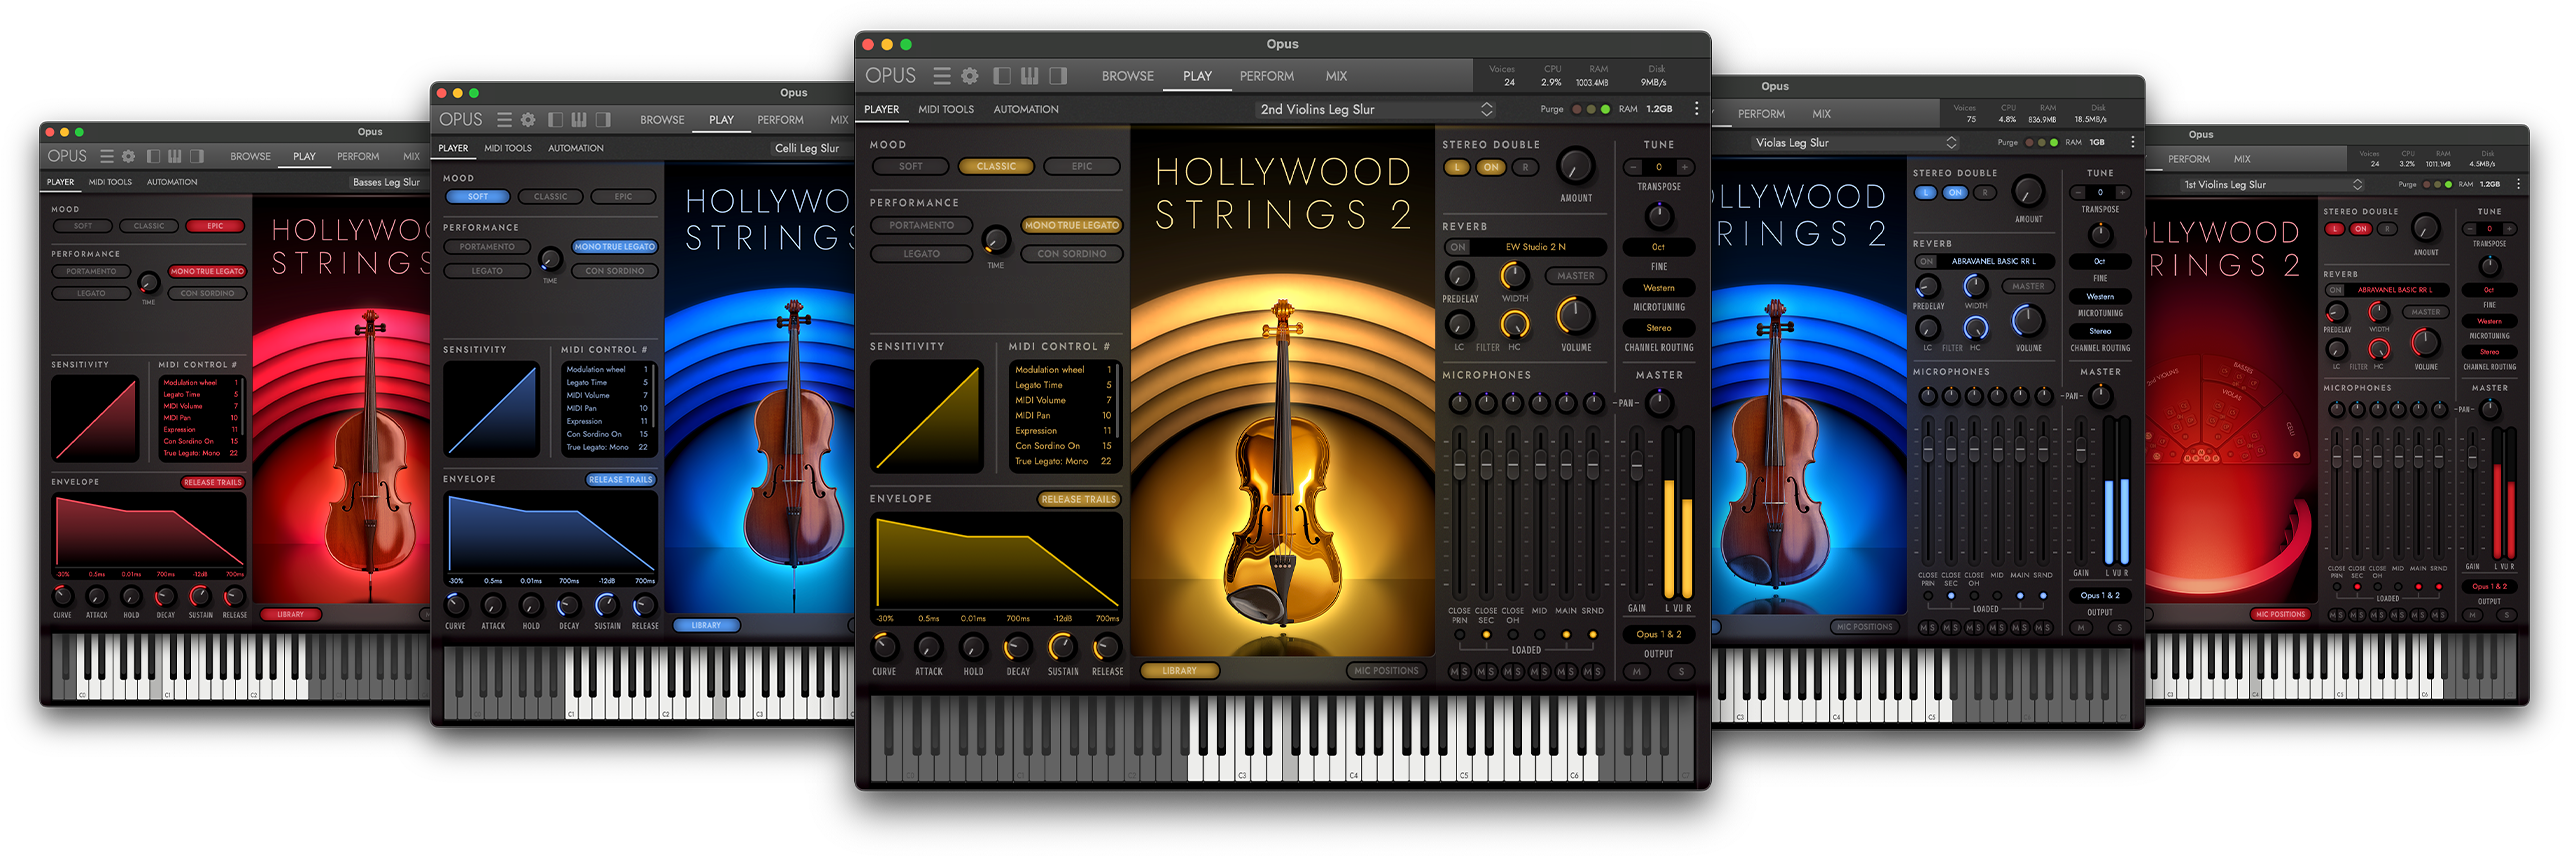 Hollywood Strings 2 Interfaces